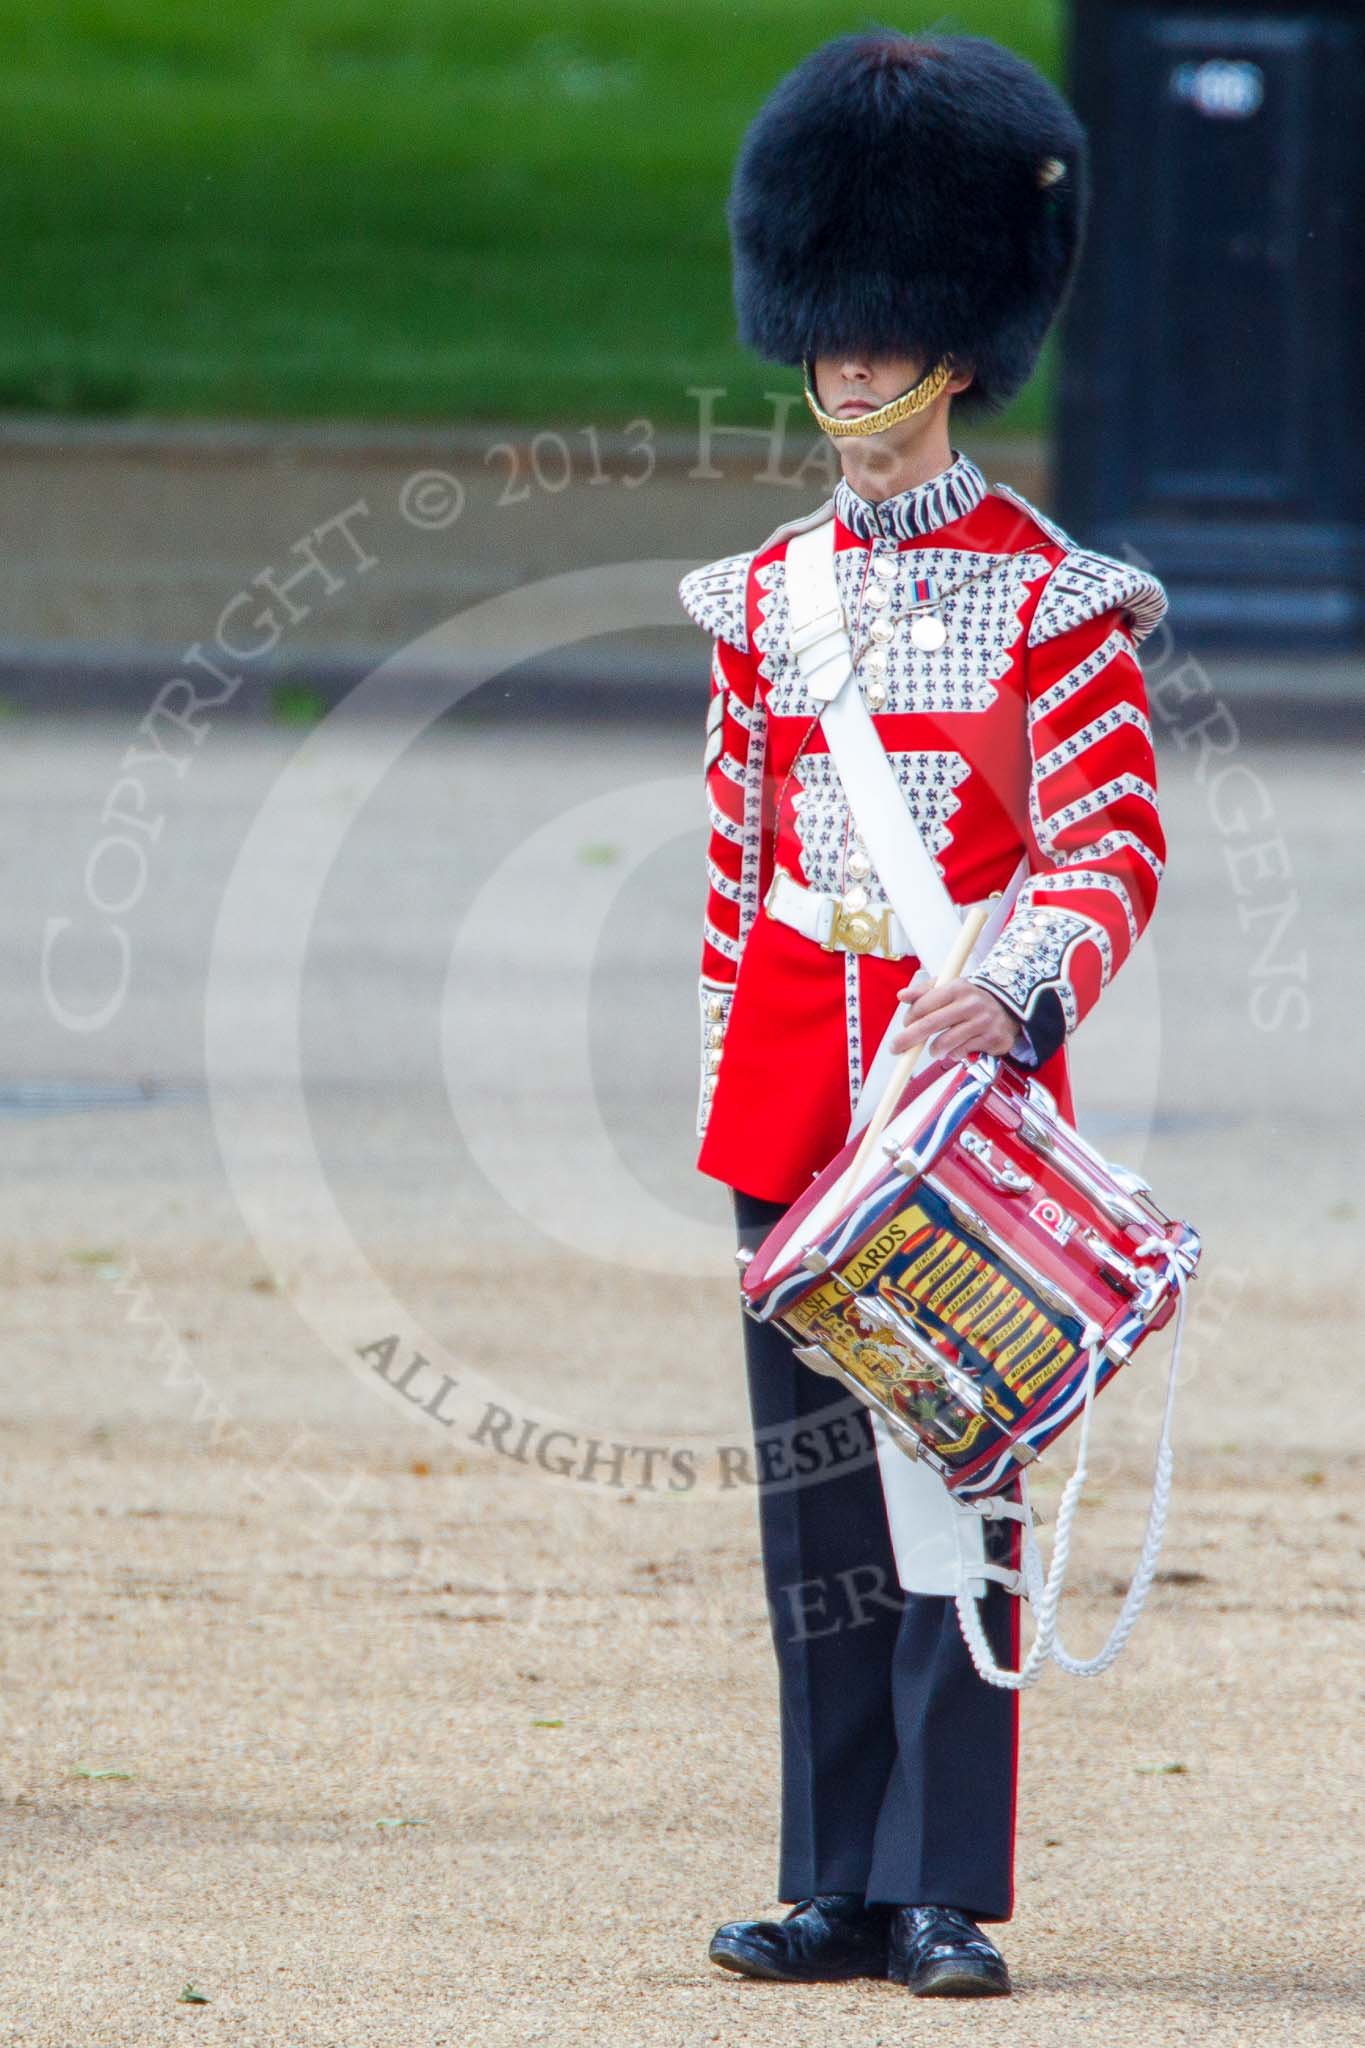 Trooping the Colour 2013: The "Lone Drummer", Lance Corporal Christopher Rees ready to play the Drummer's Call. Image #424, 15 June 2013 11:15 Horse Guards Parade, London, UK